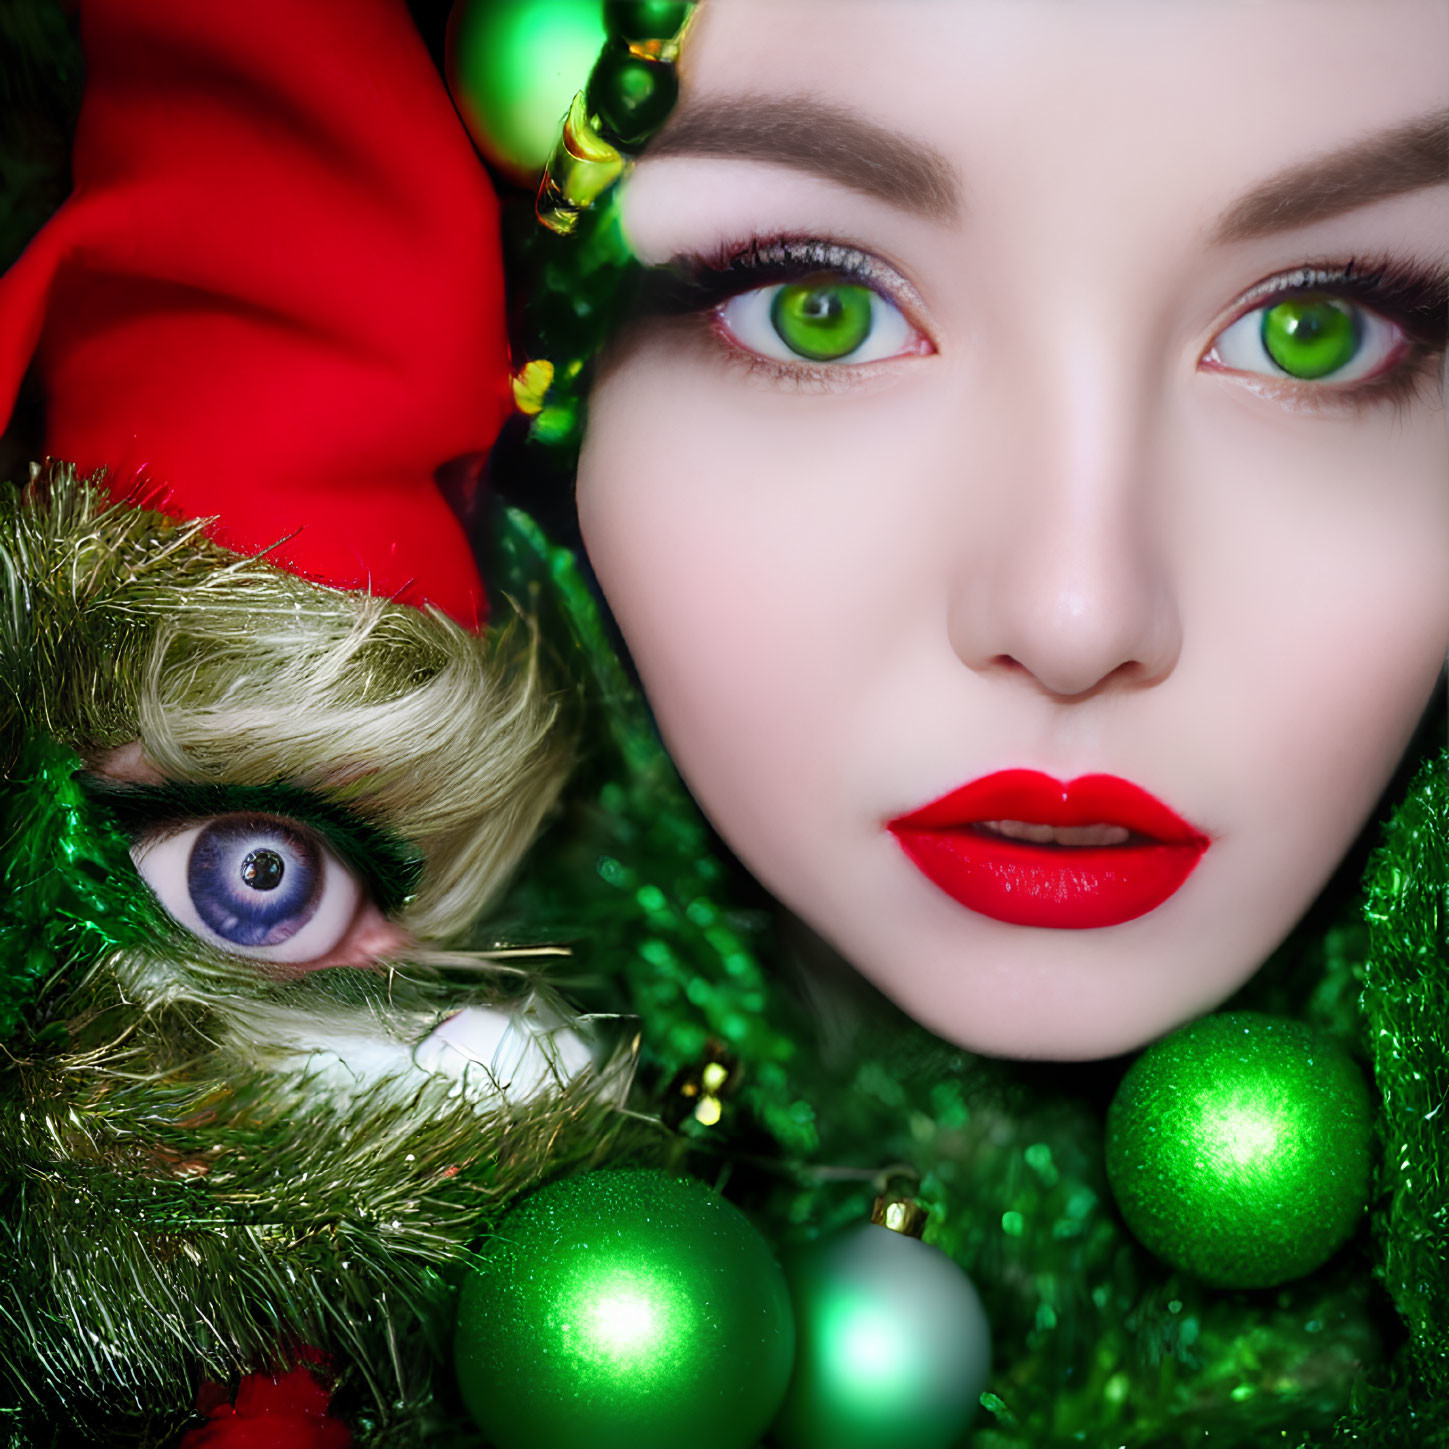 Person with Bright Green Eyes and Red Lips in Santa Hat with Christmas Decorations